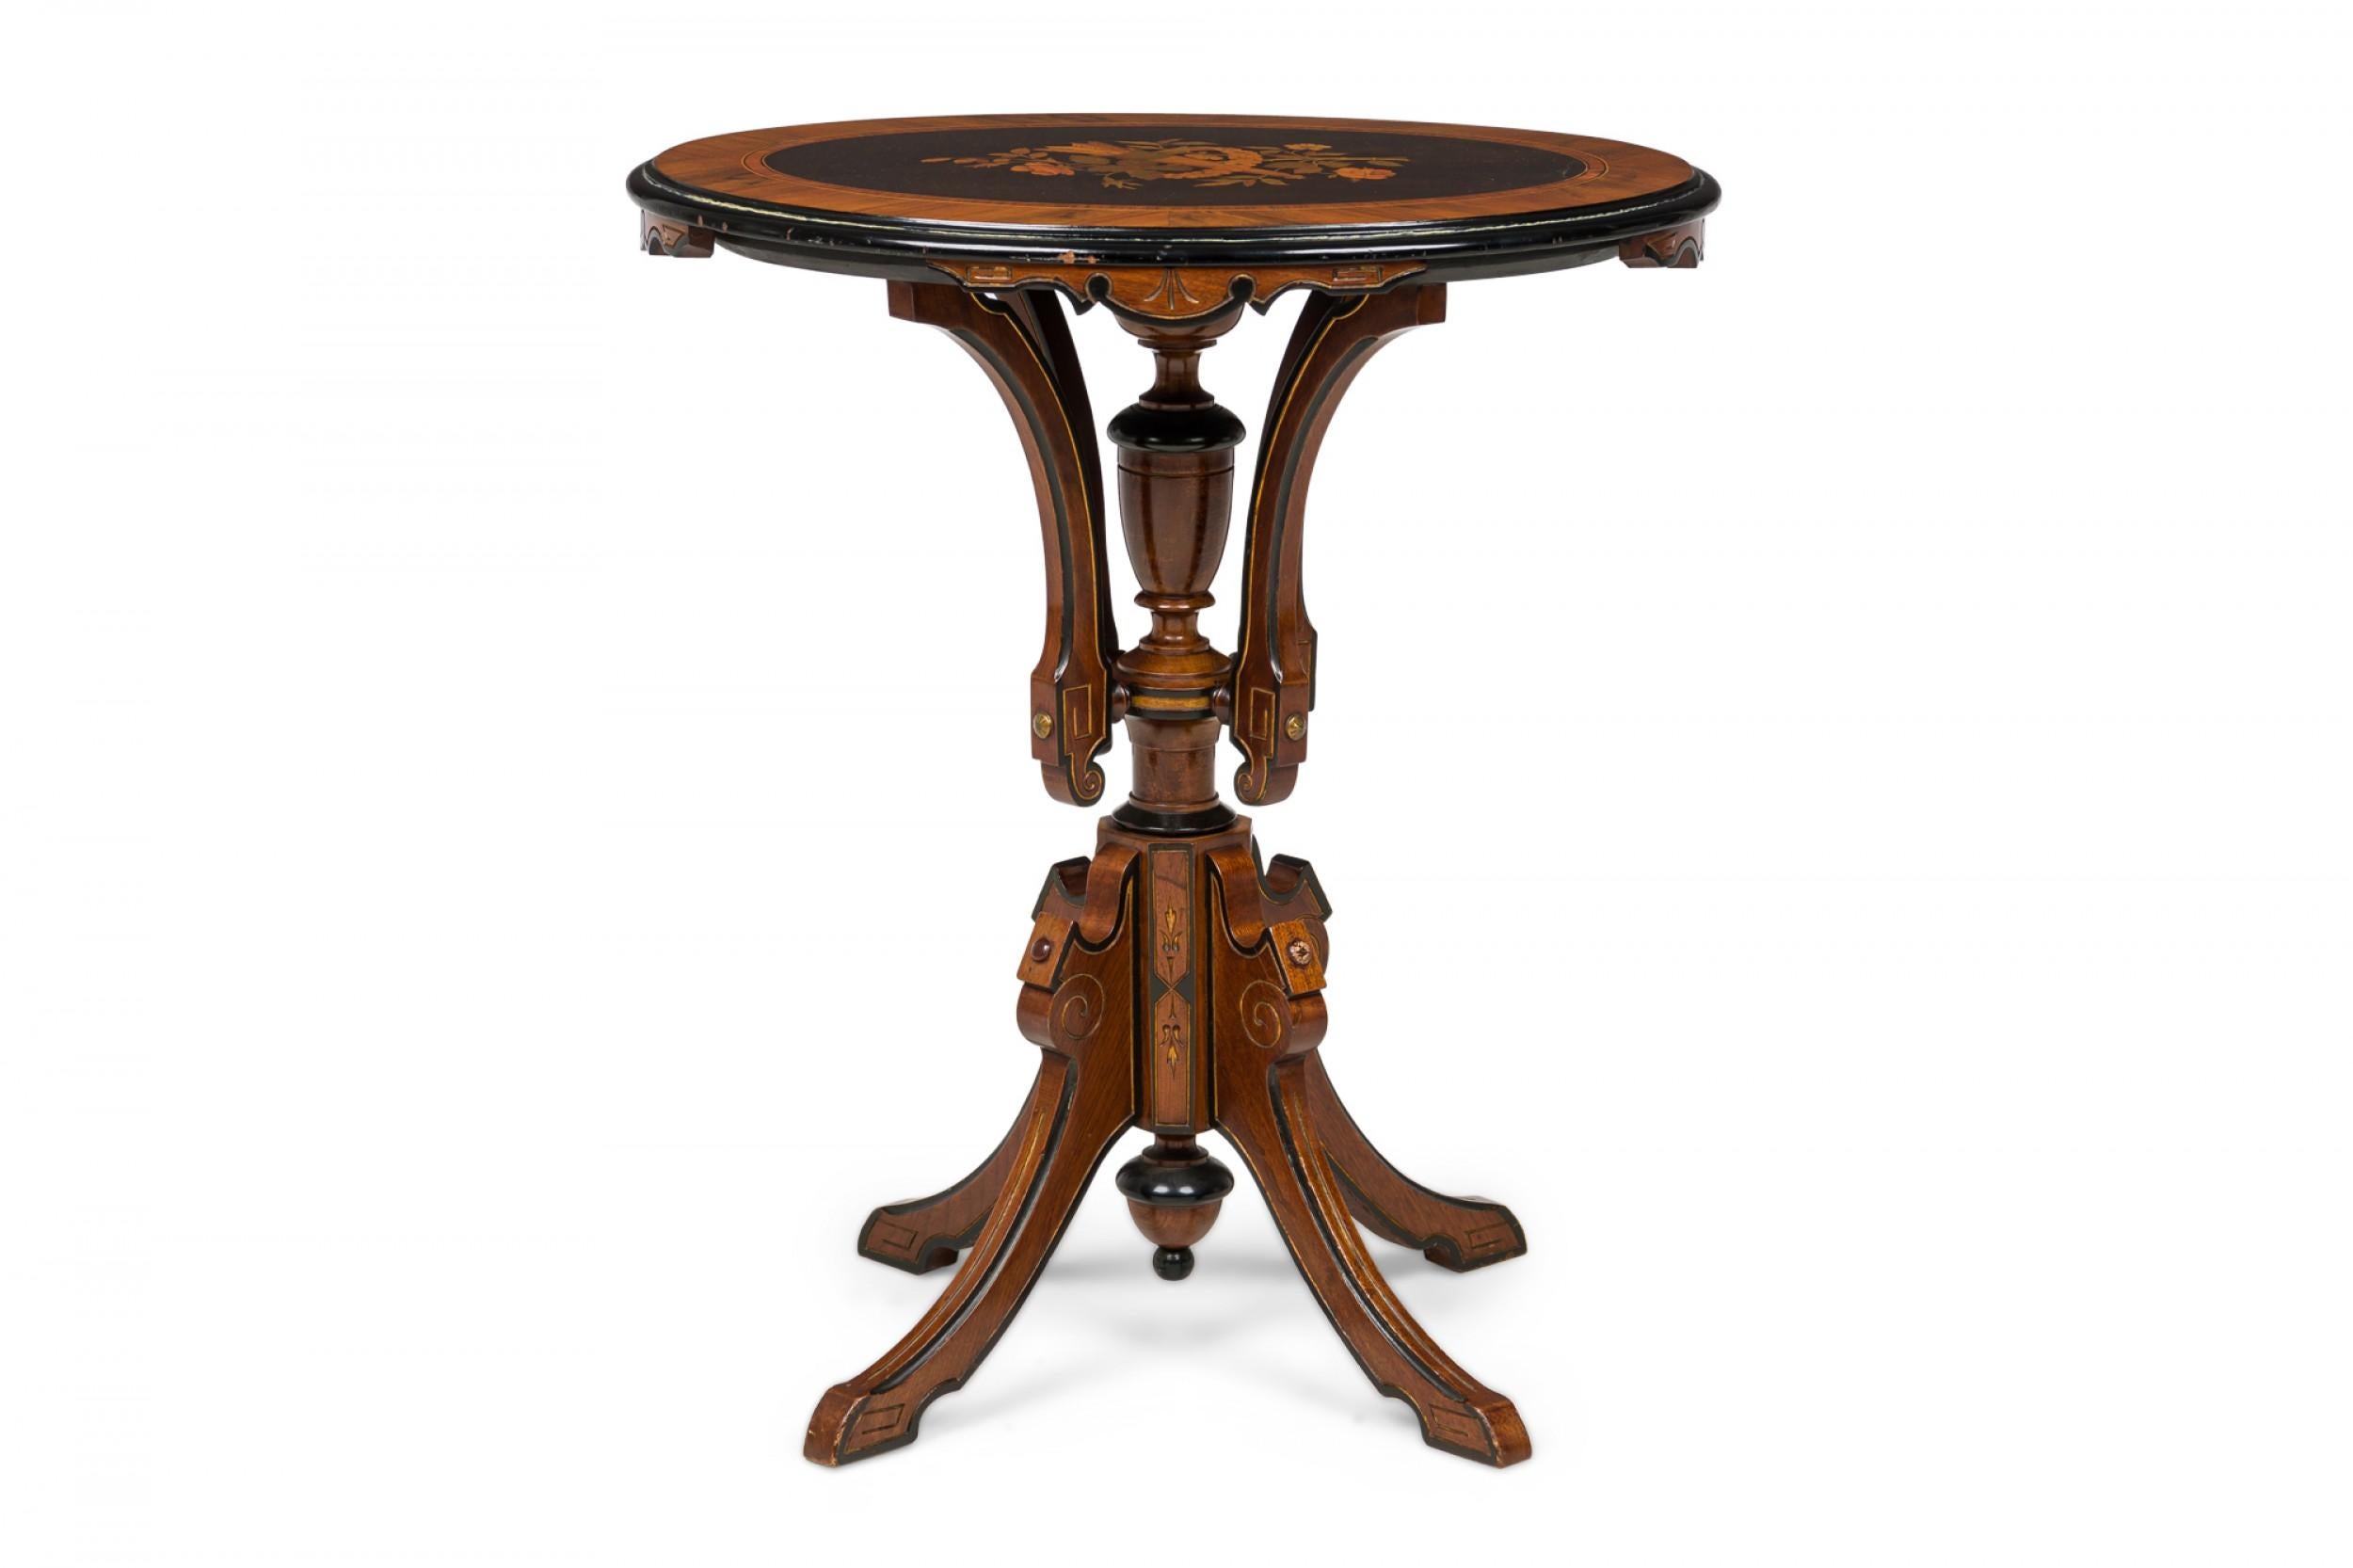 American Victorian wooden side table with gold leaf detailing, an oval top with an inlaid quiver design encircled by a floral spray, resting on a pedestal base with central turned urn design and four splayed carved legs.